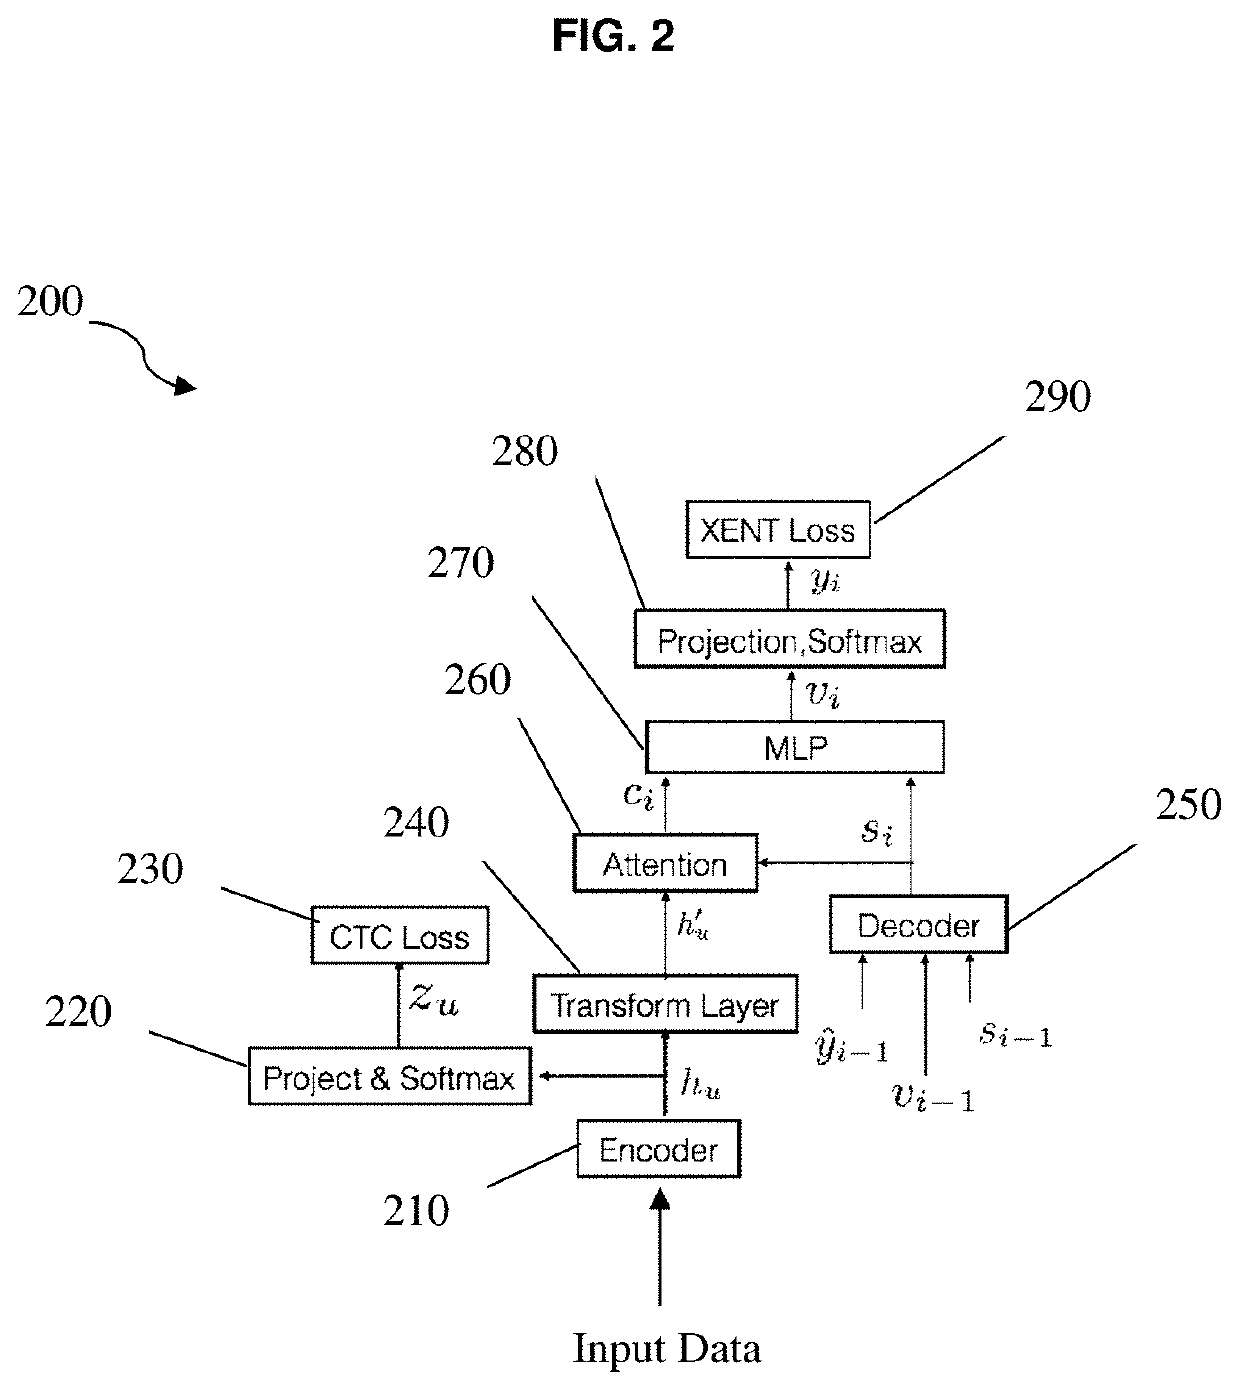 Multi-task training architecture and strategy for attention-based speech recognition system